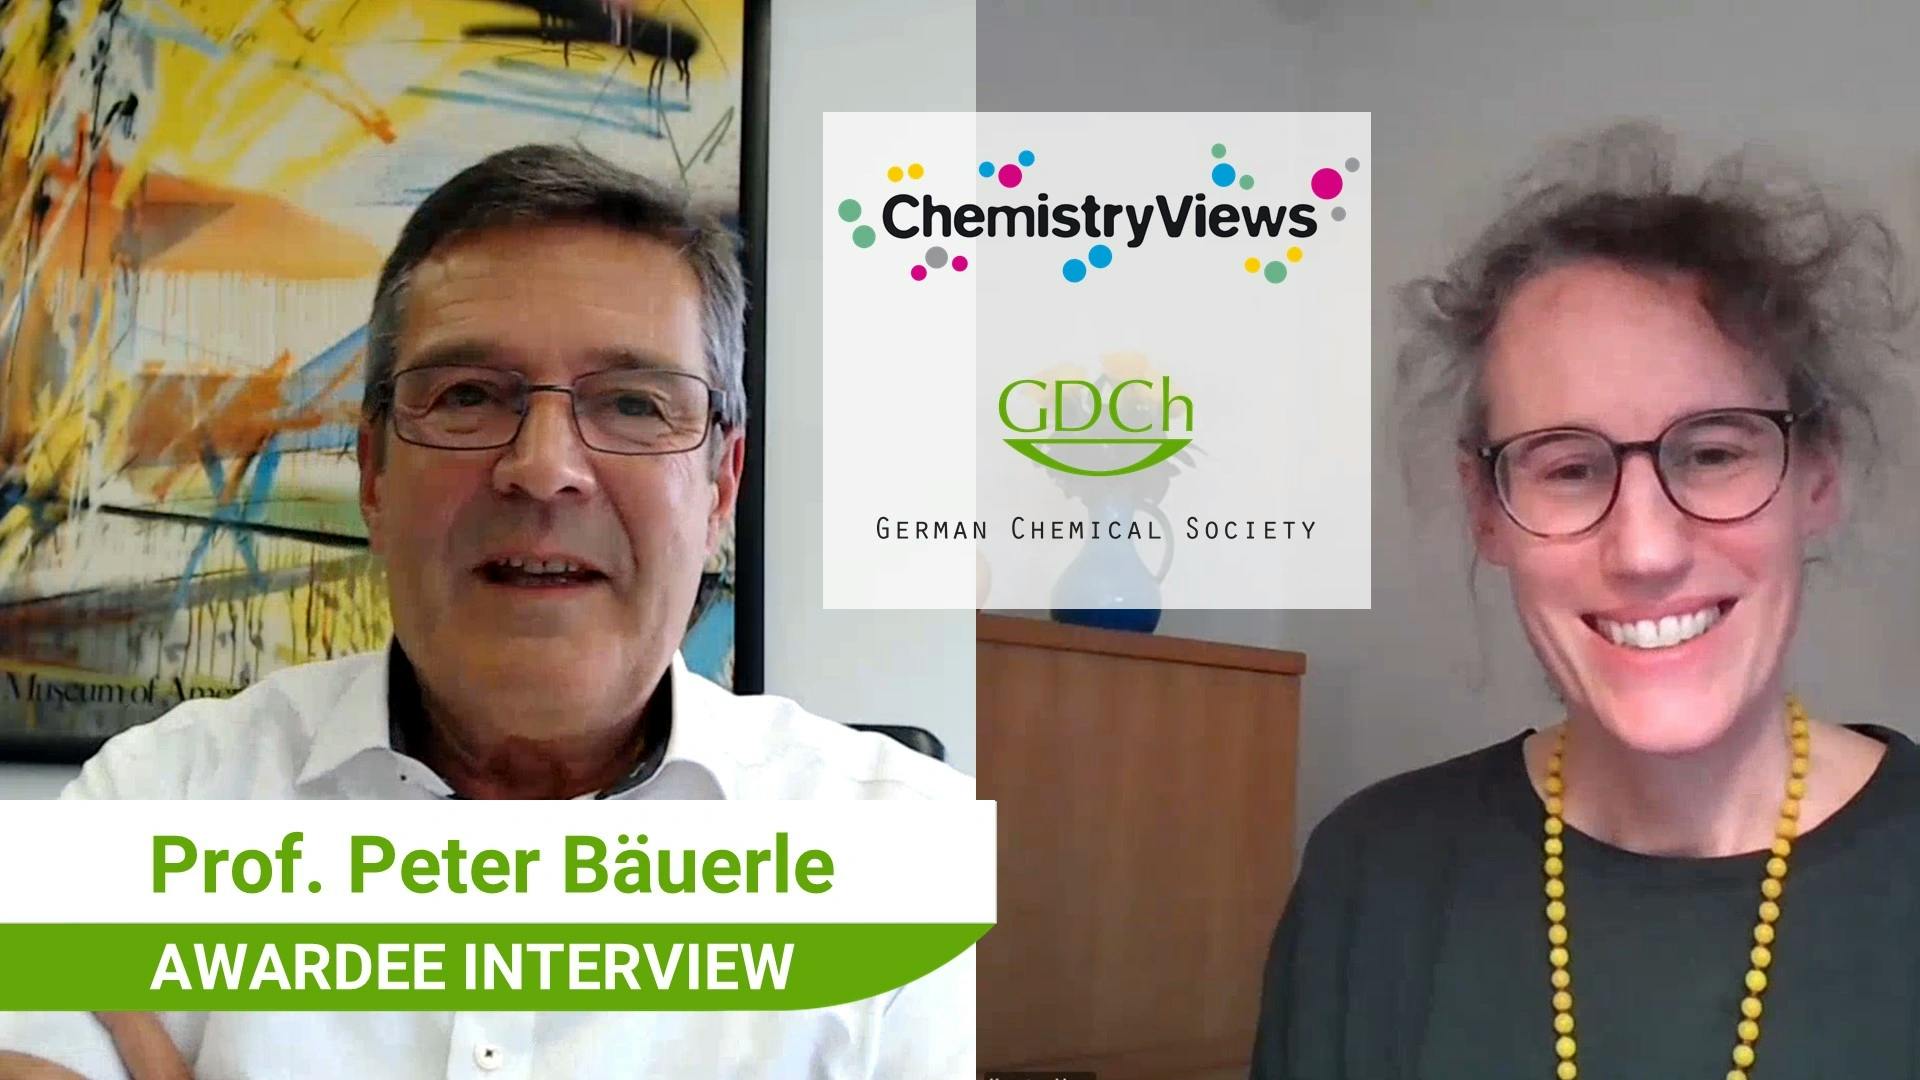 “Nothing is easier than create new molecules.”—Awardee interview with Peter Bäuerle